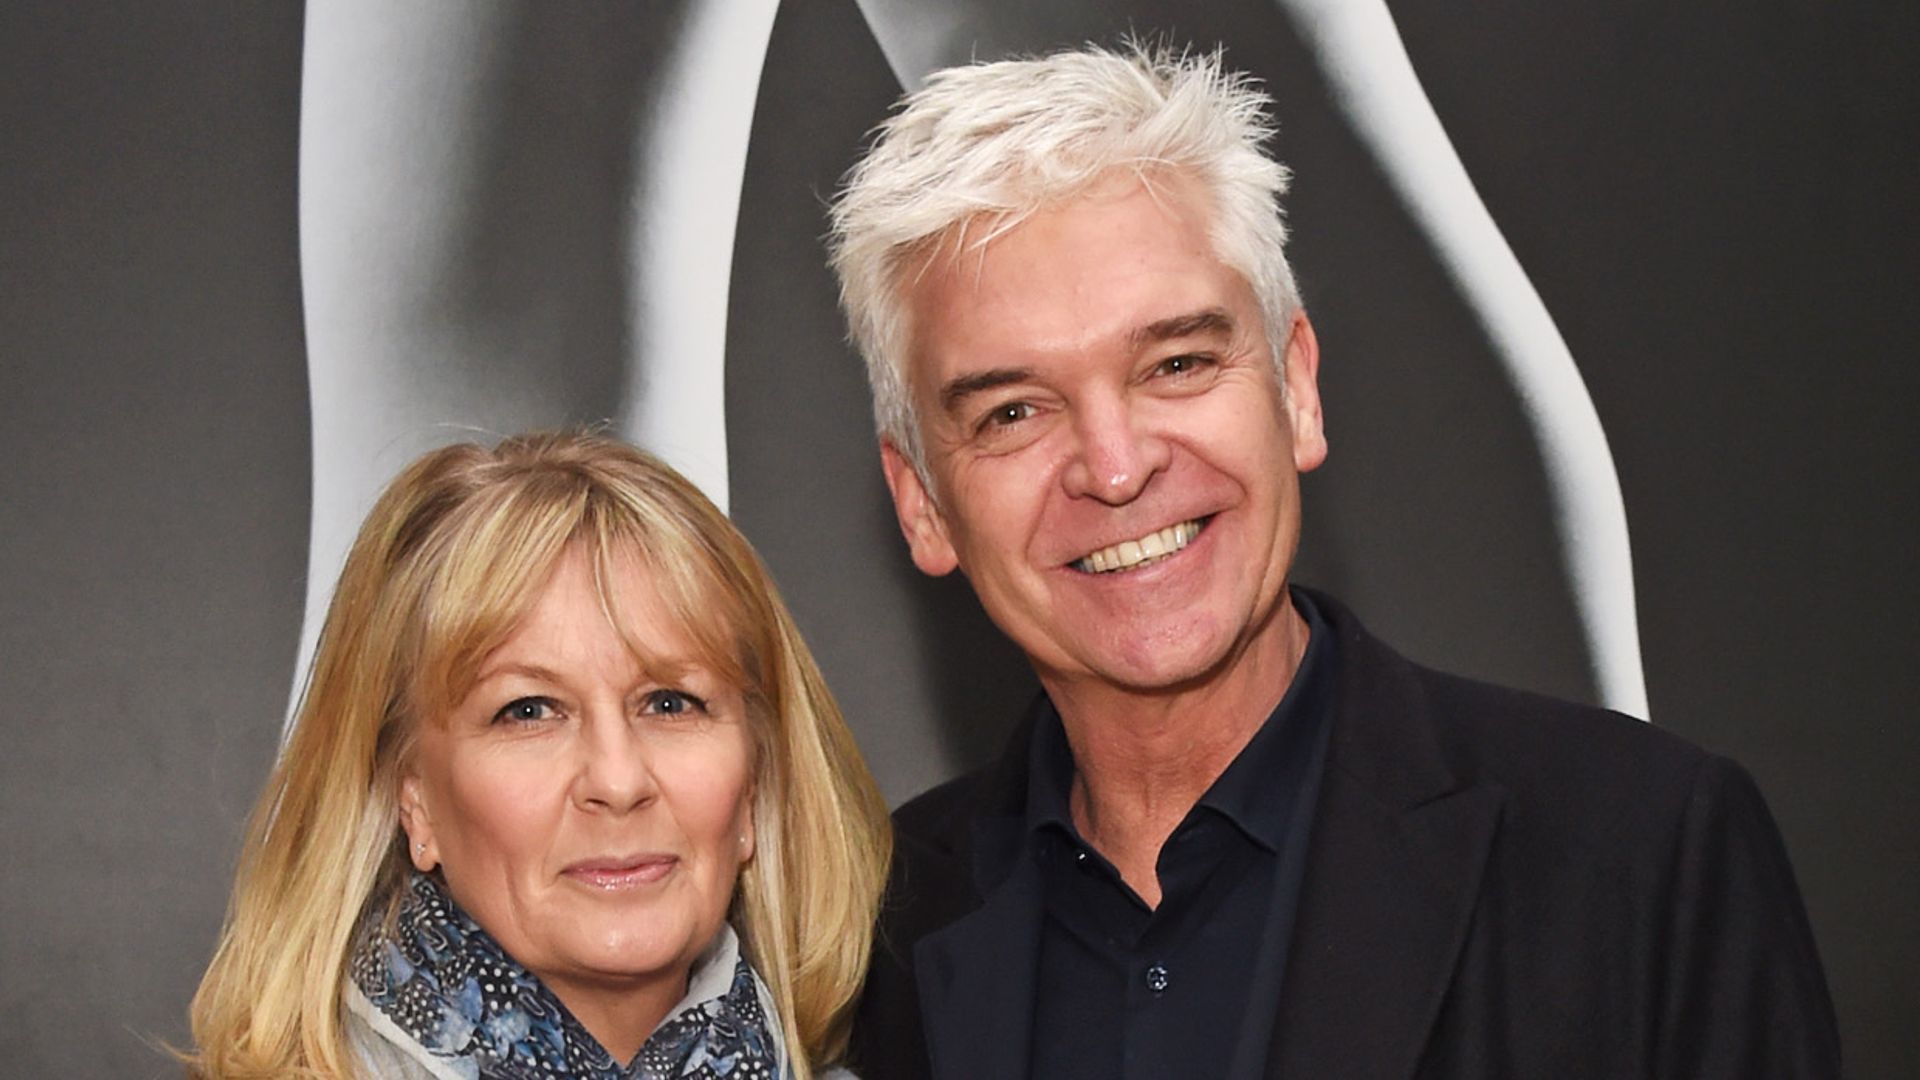 Phillip Schofield and Stephanie Lowe attend the opening night reception of the English National Ballet's production of "Giselle" hosted by St Martins Lane on January 11, 2017 